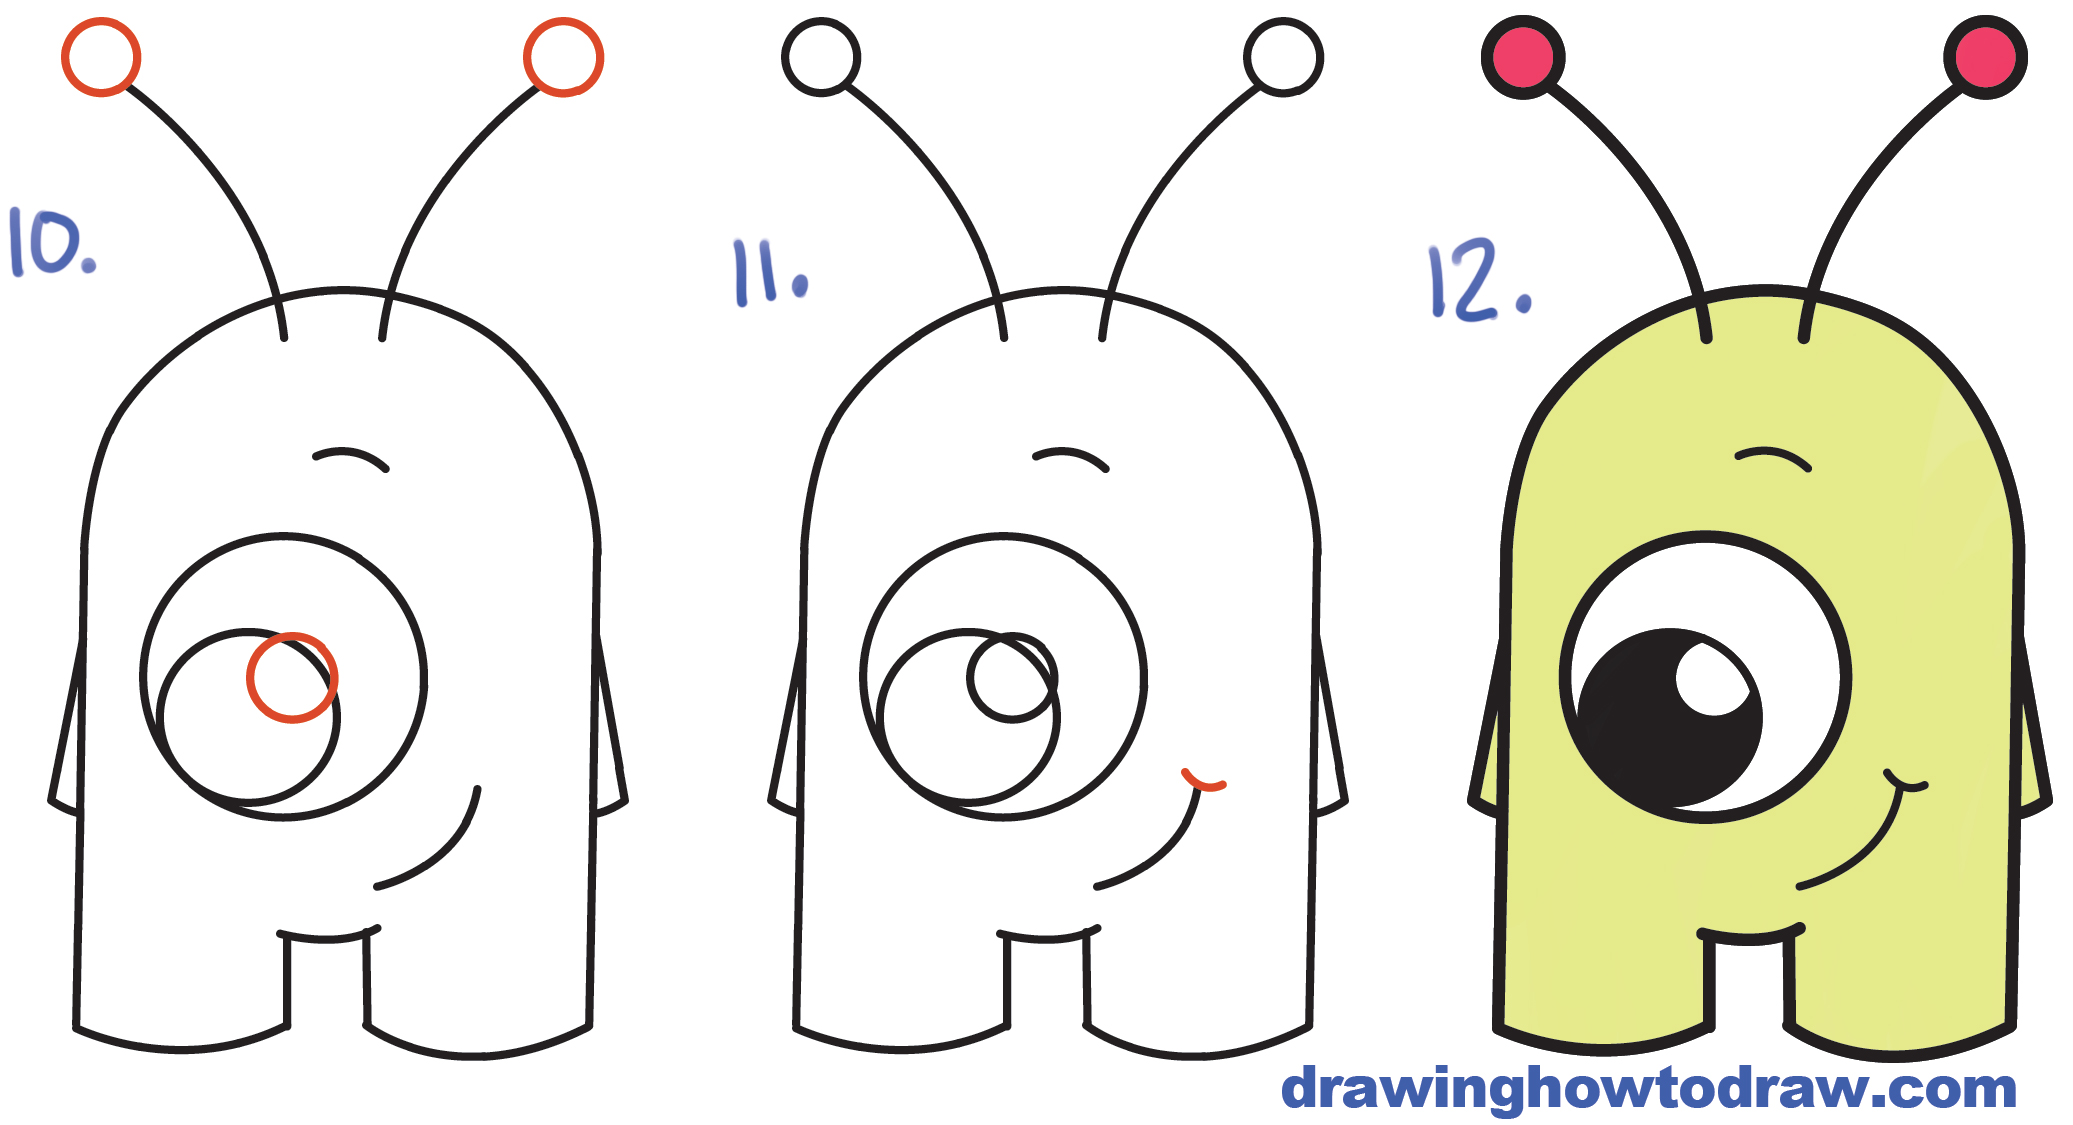 step by step drawing instructions